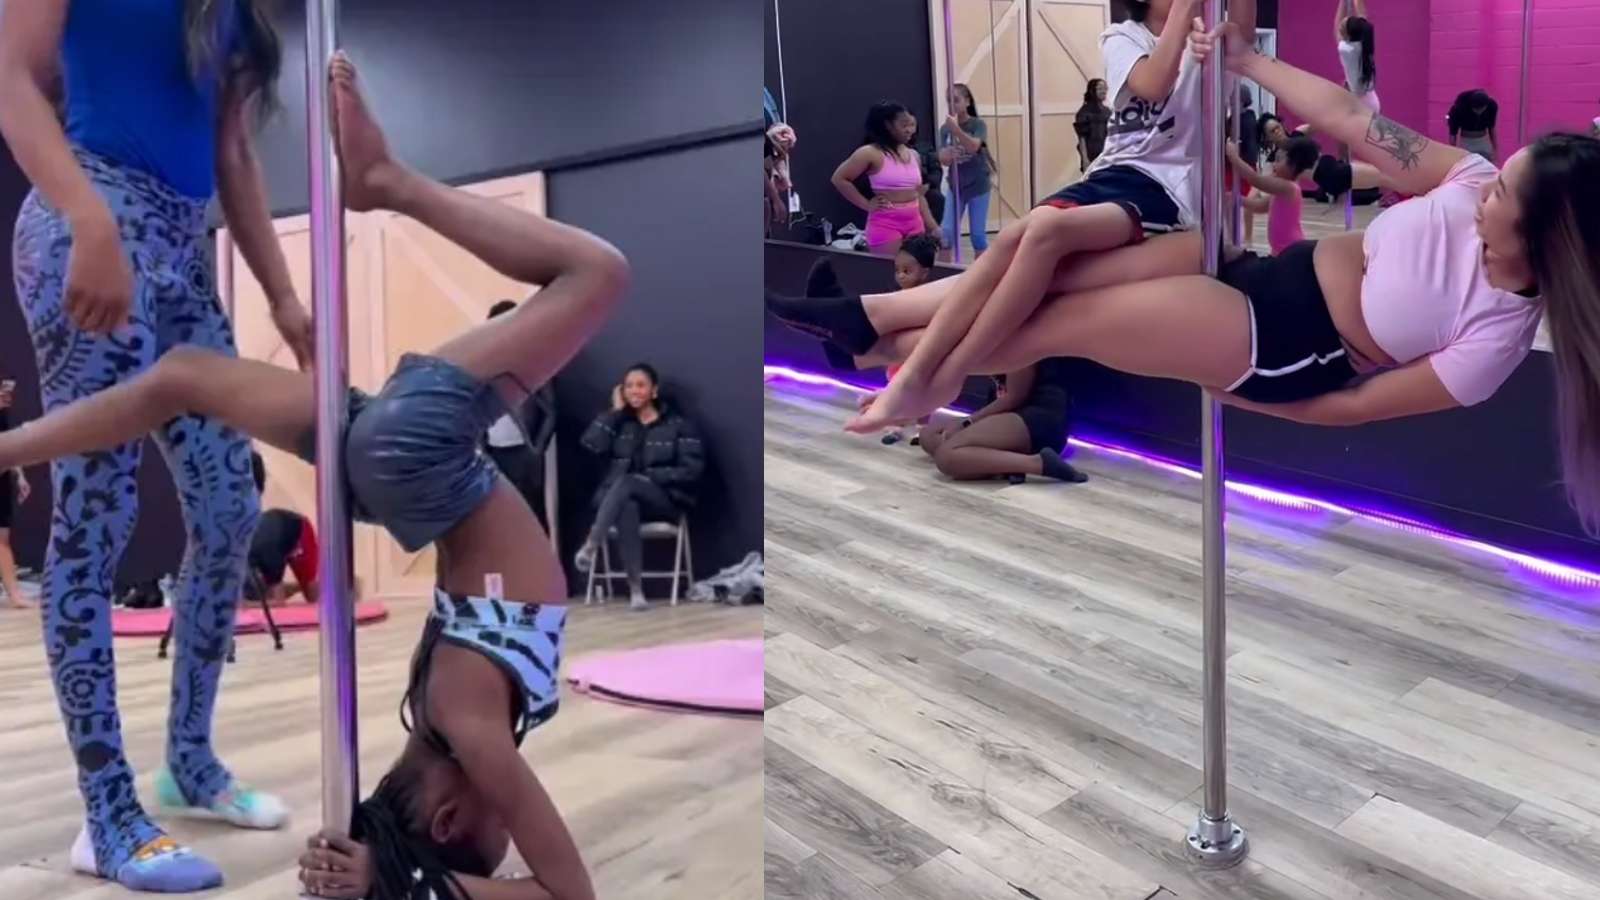 Viral mommy and me pole dancing lessons